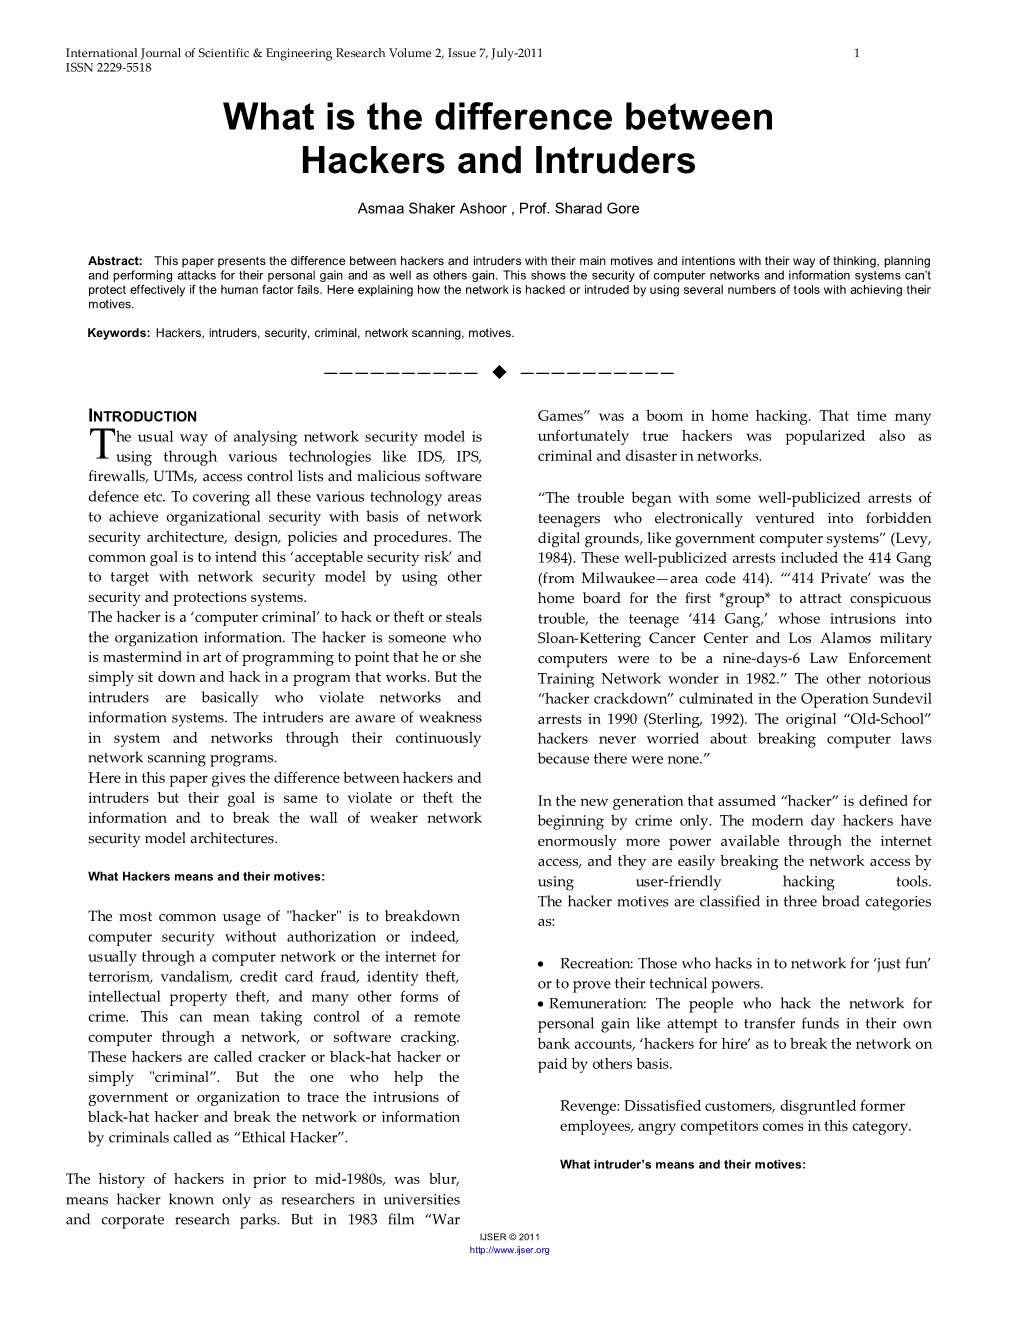 What Is the Difference Between Hackers and Intruders